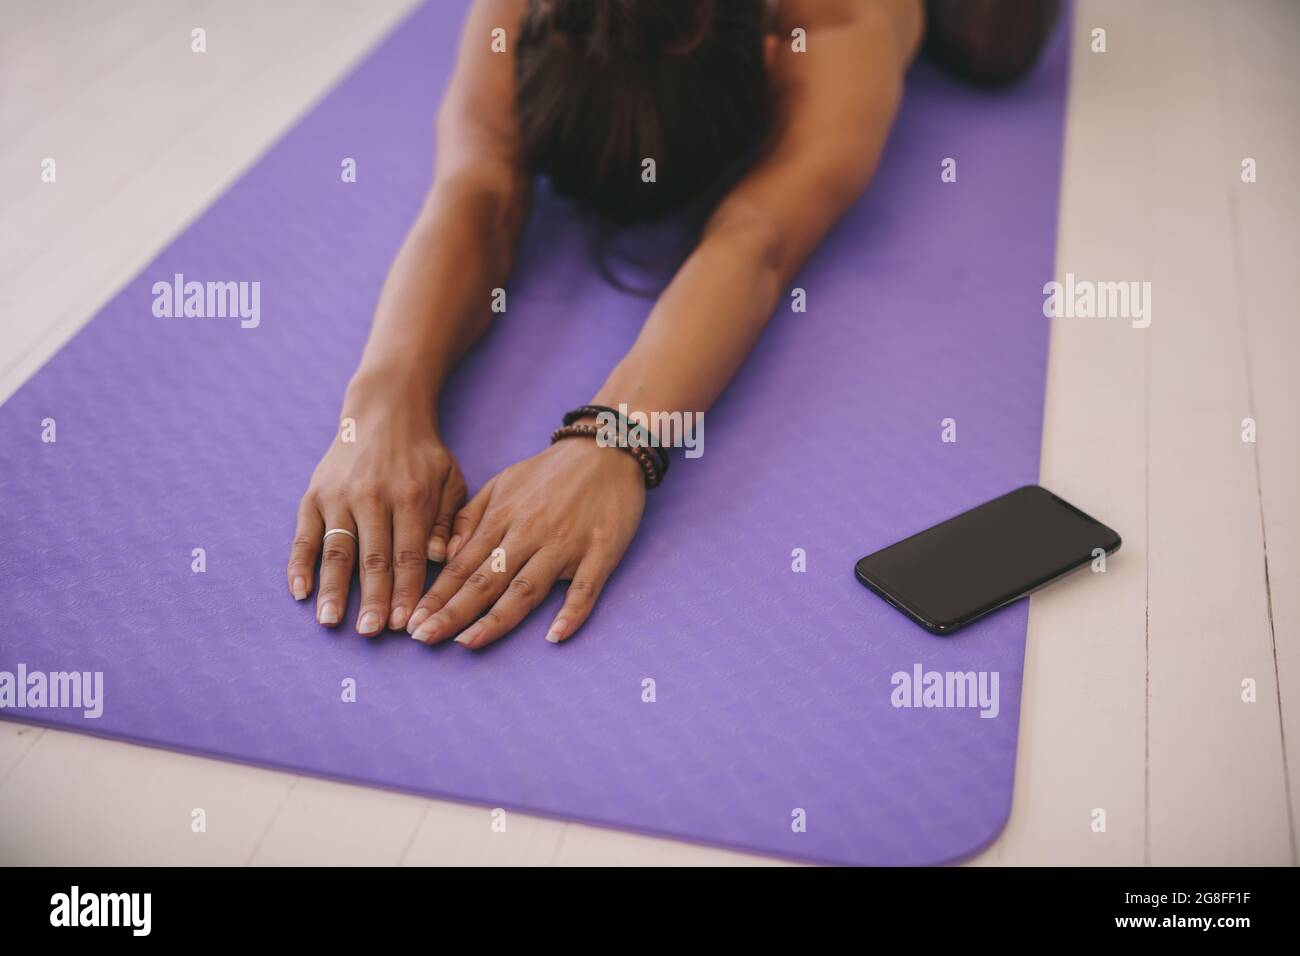 Woman doing stretching workout on exercise mat. Woman doing child pose yoga at gym, with focus on hands and smart phone in front. Stock Photo